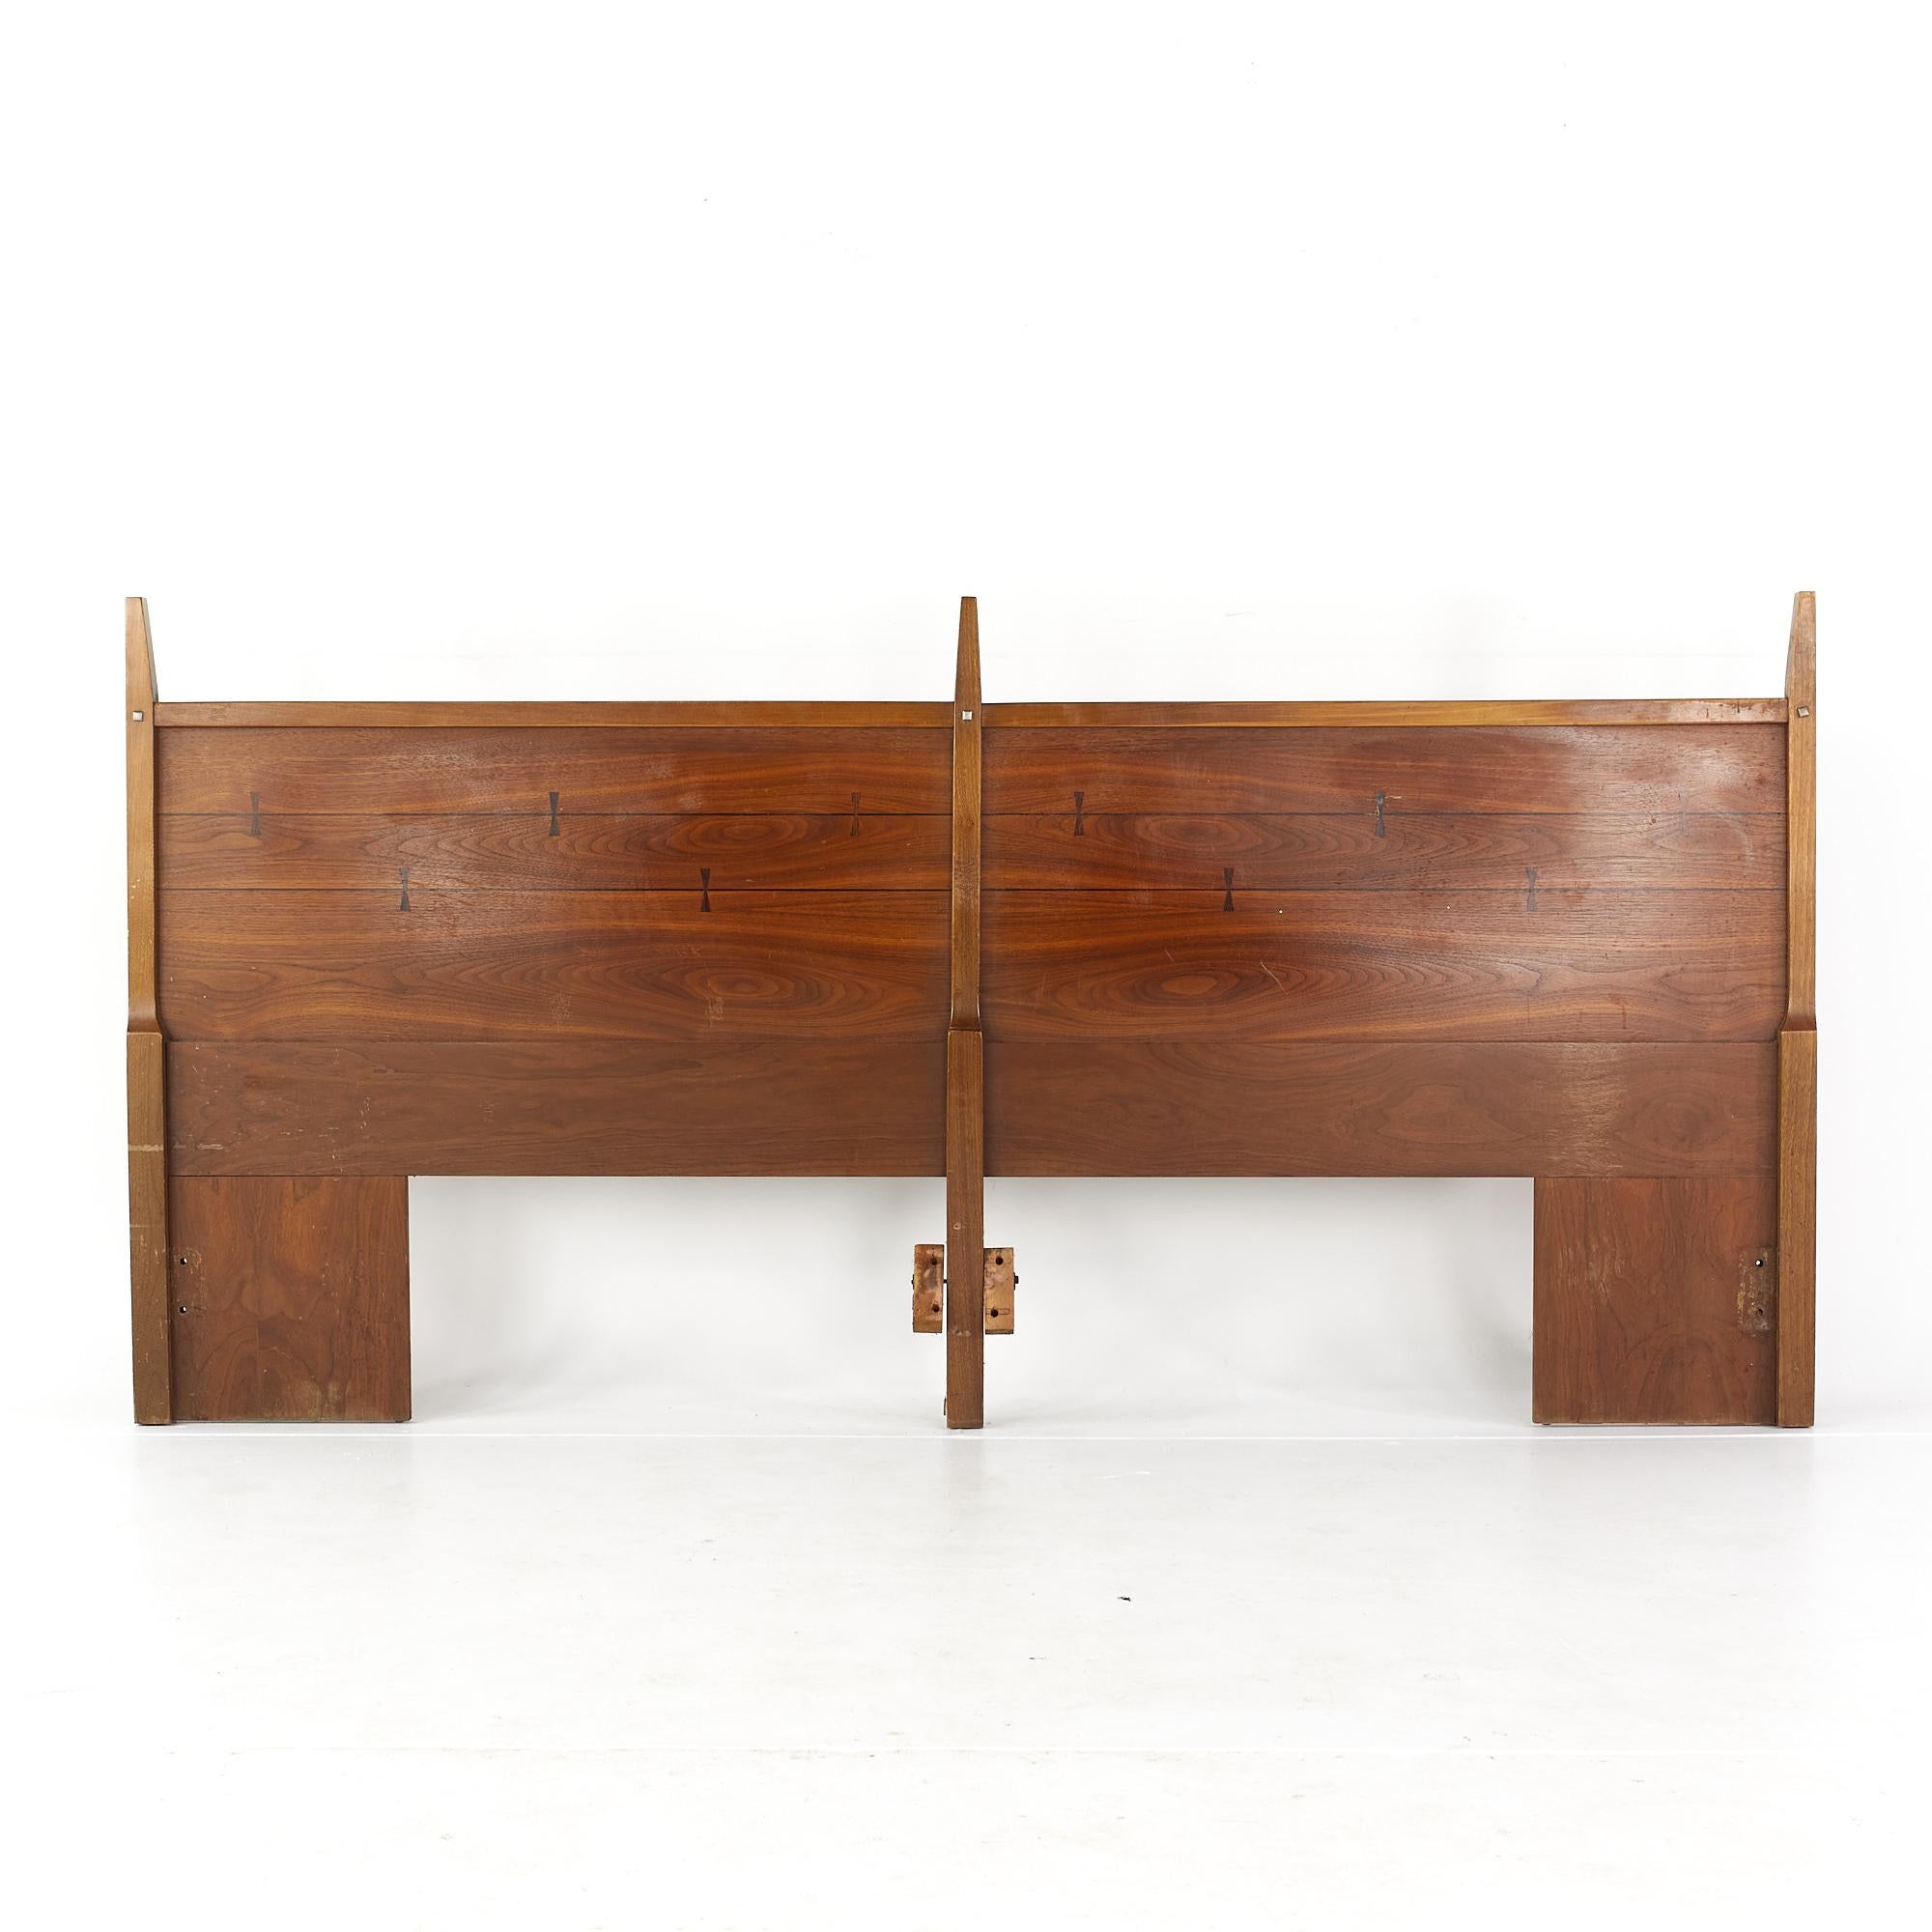 Lane Mid Century Bowtie Tuxedo walnut and Rosewood King headboard

This headboard measures: 81 wide x 1.75 deep x 40 inches high

All pieces of furniture can be had in what we call restored vintage condition. That means the piece is restored